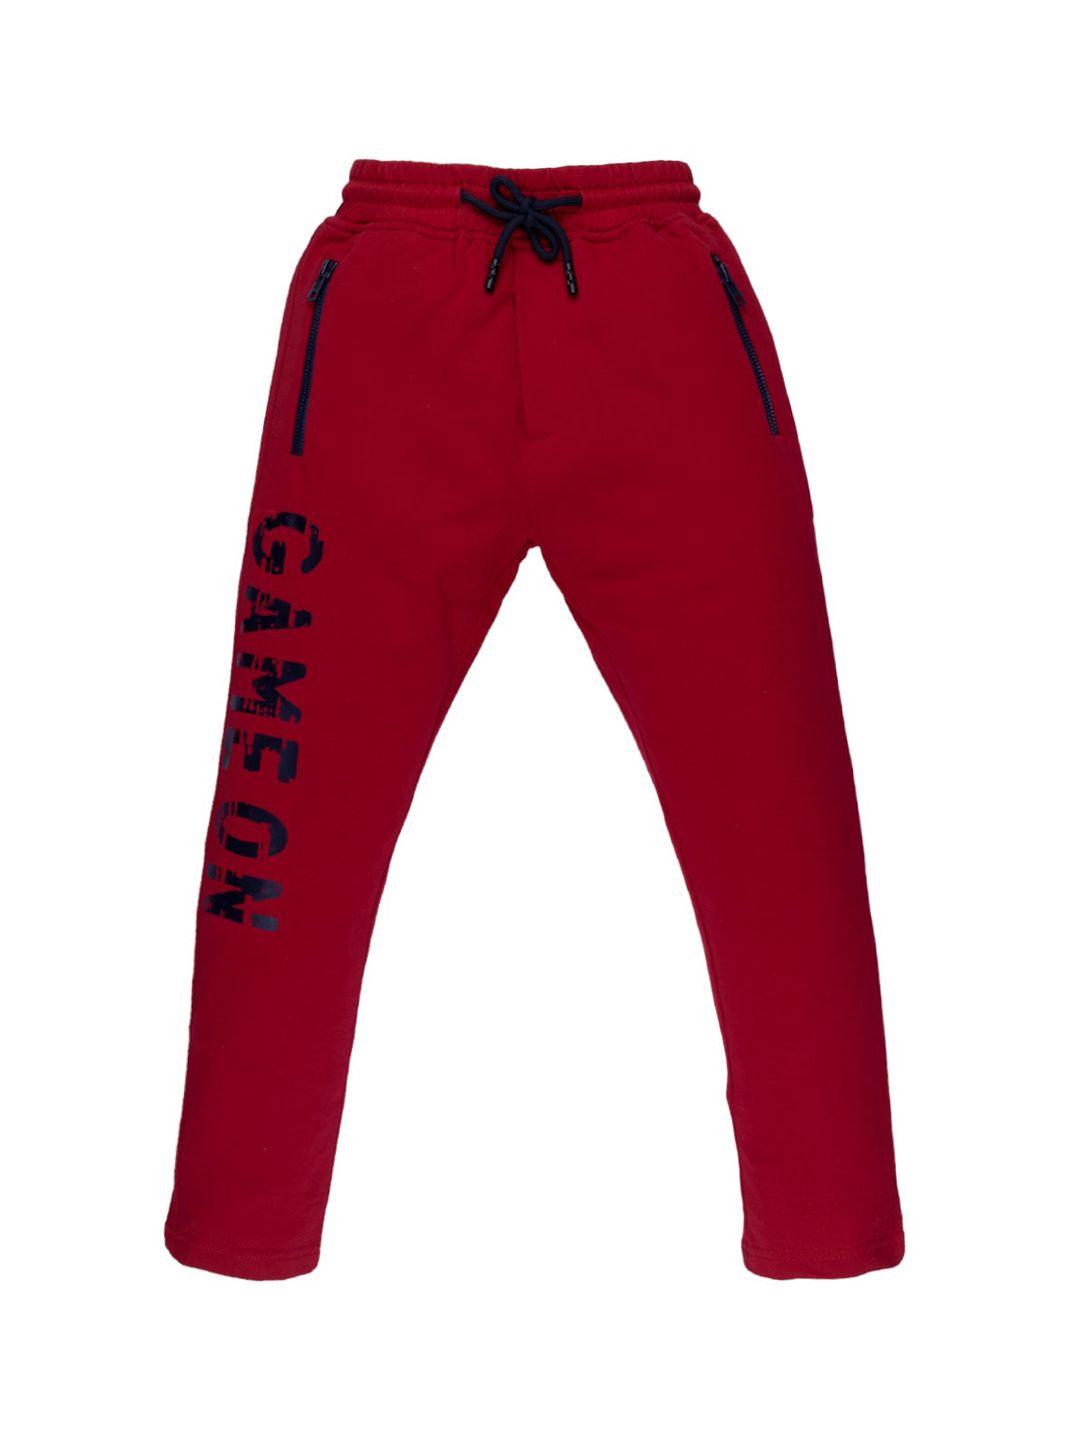 status quo boys red solid track pants